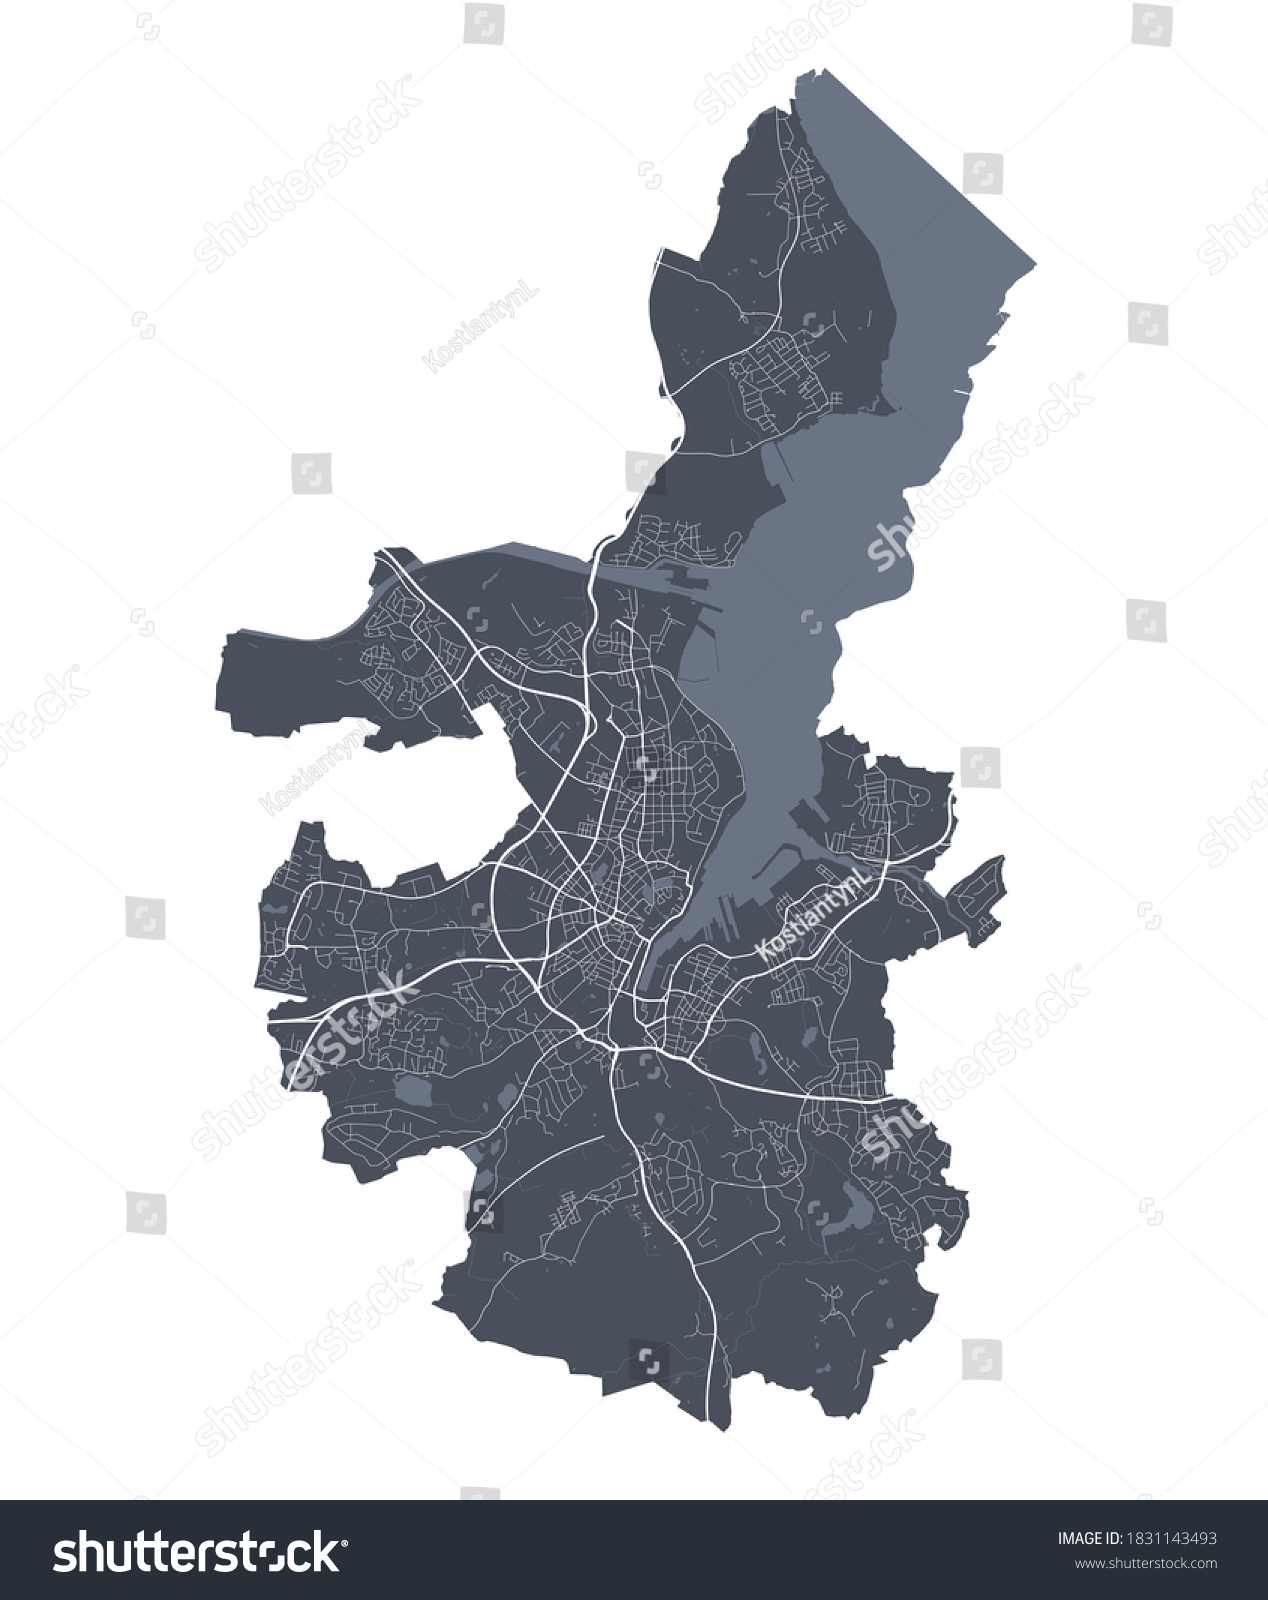 SVG of Kiel map. Detailed vector map of Kiel city administrative area. Cityscape poster metropolitan aria view. Dark land with white streets, roads and avenues. White background. svg